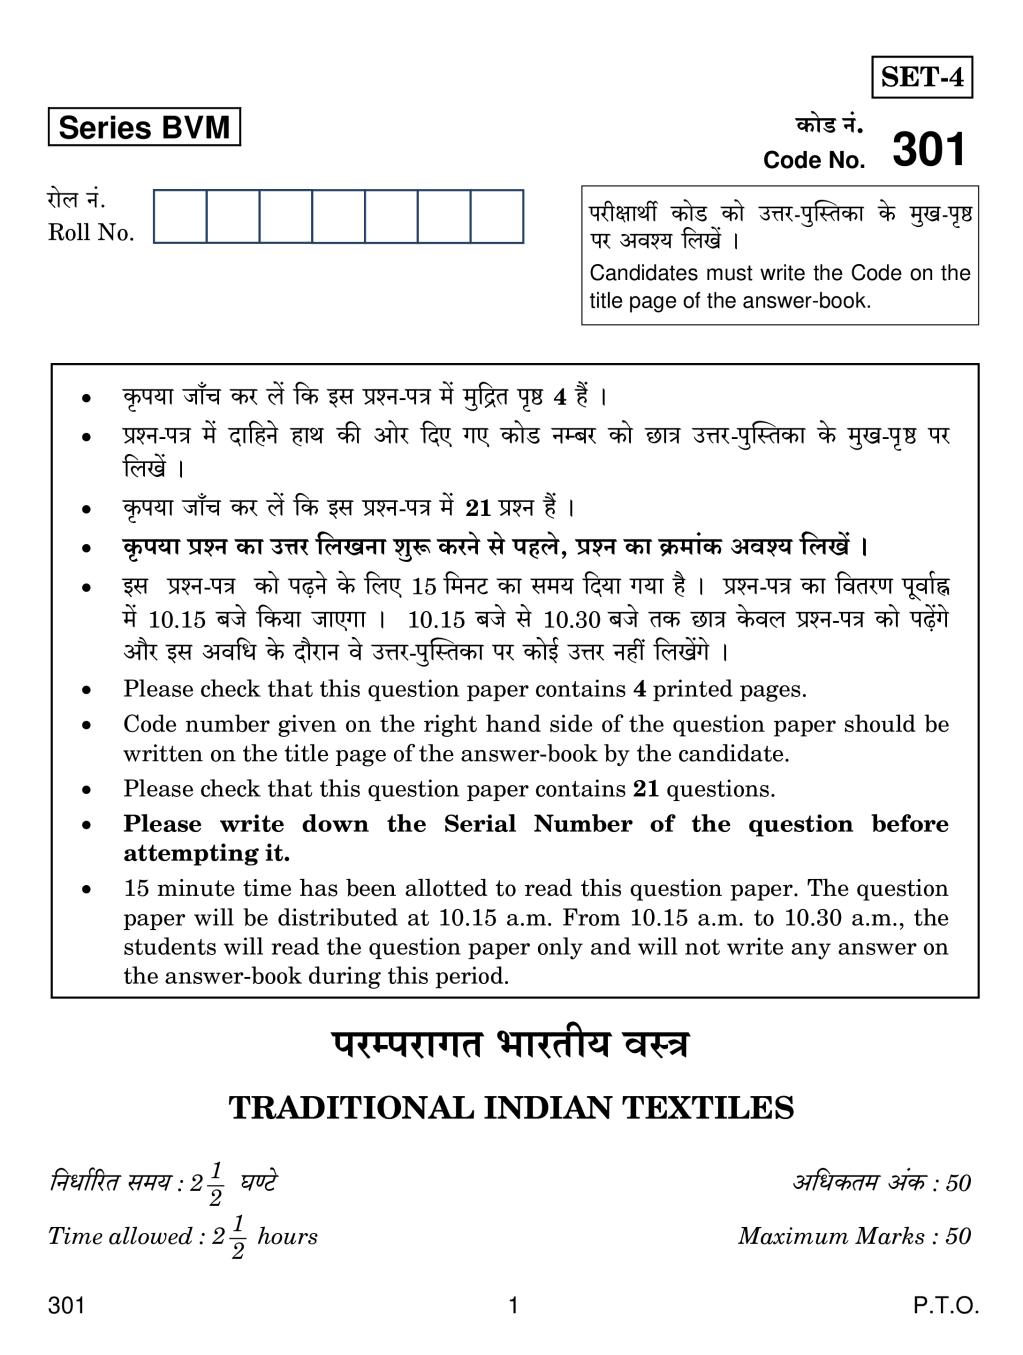 CBSE Class 12 Traditional Indian Textiles Question Paper 2019 - Page 1